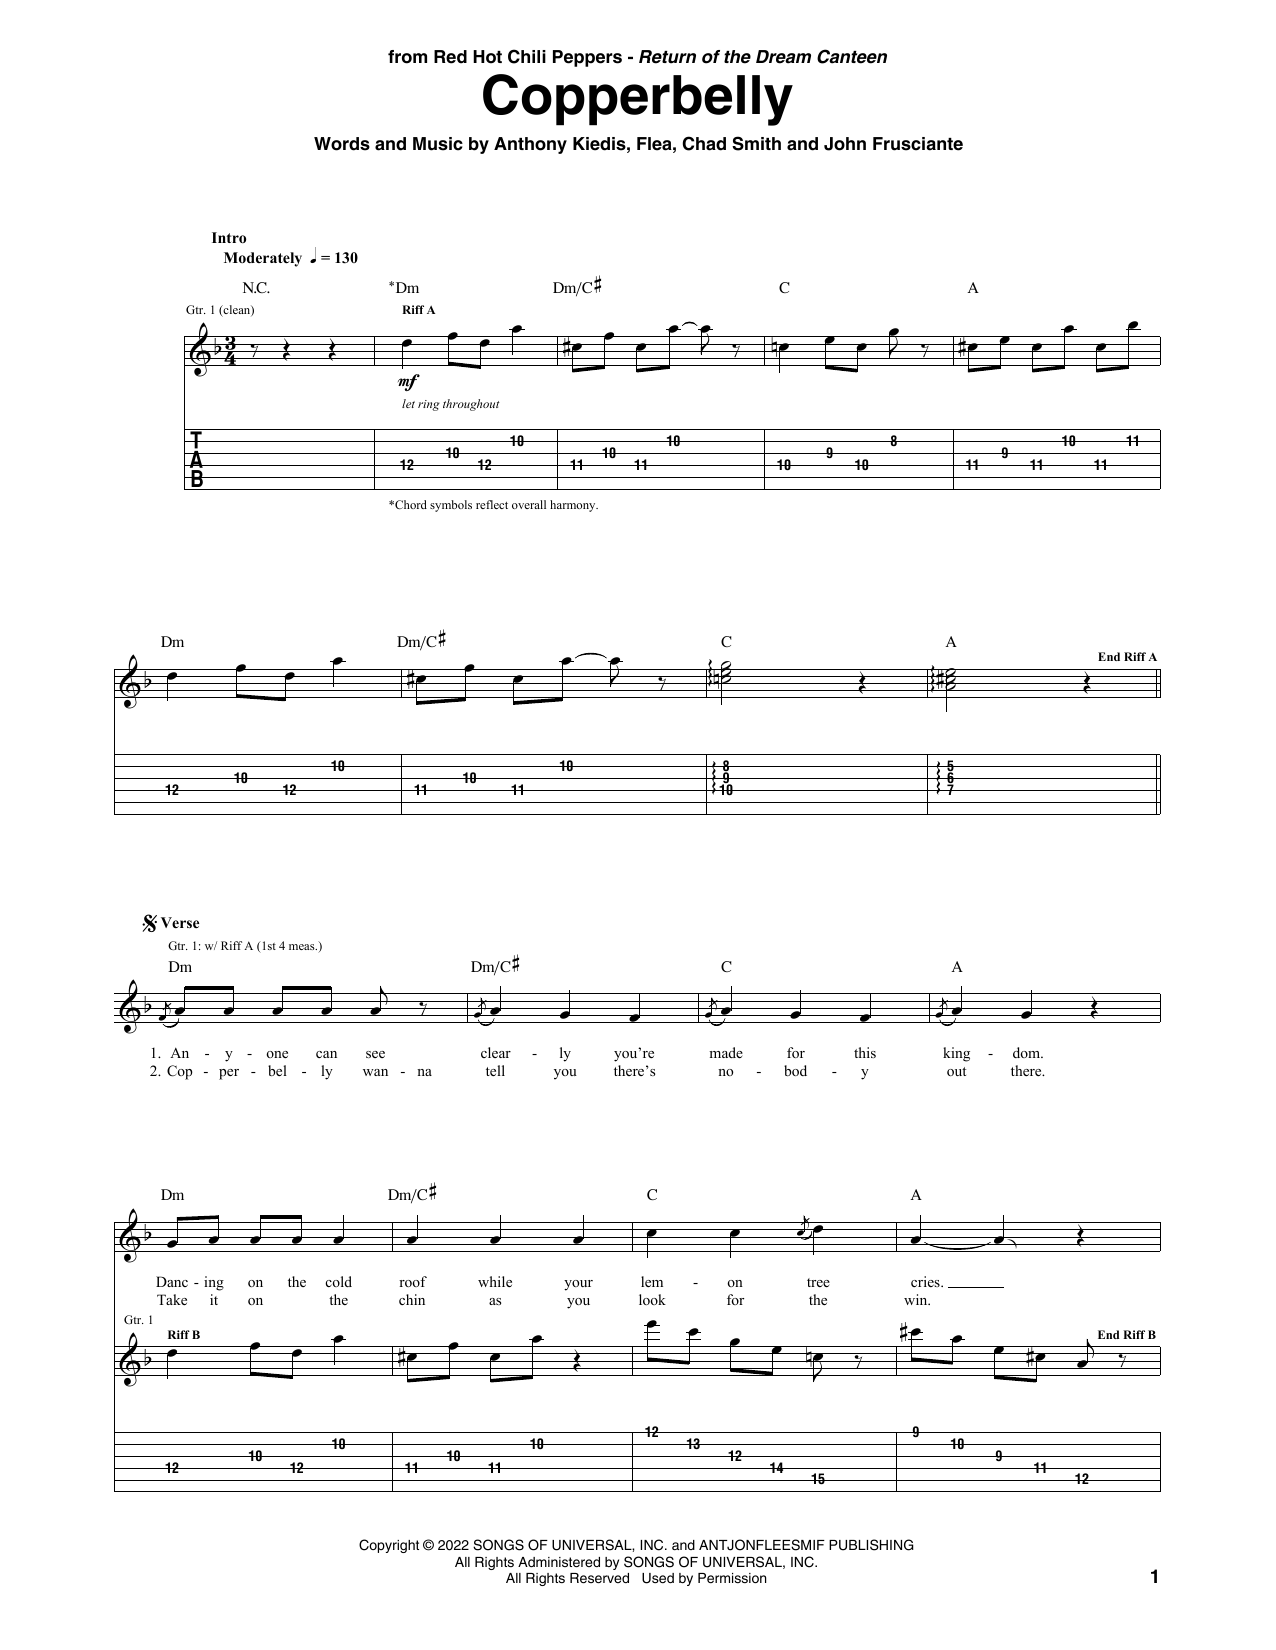 Download Red Hot Chili Peppers Copperbelly Sheet Music